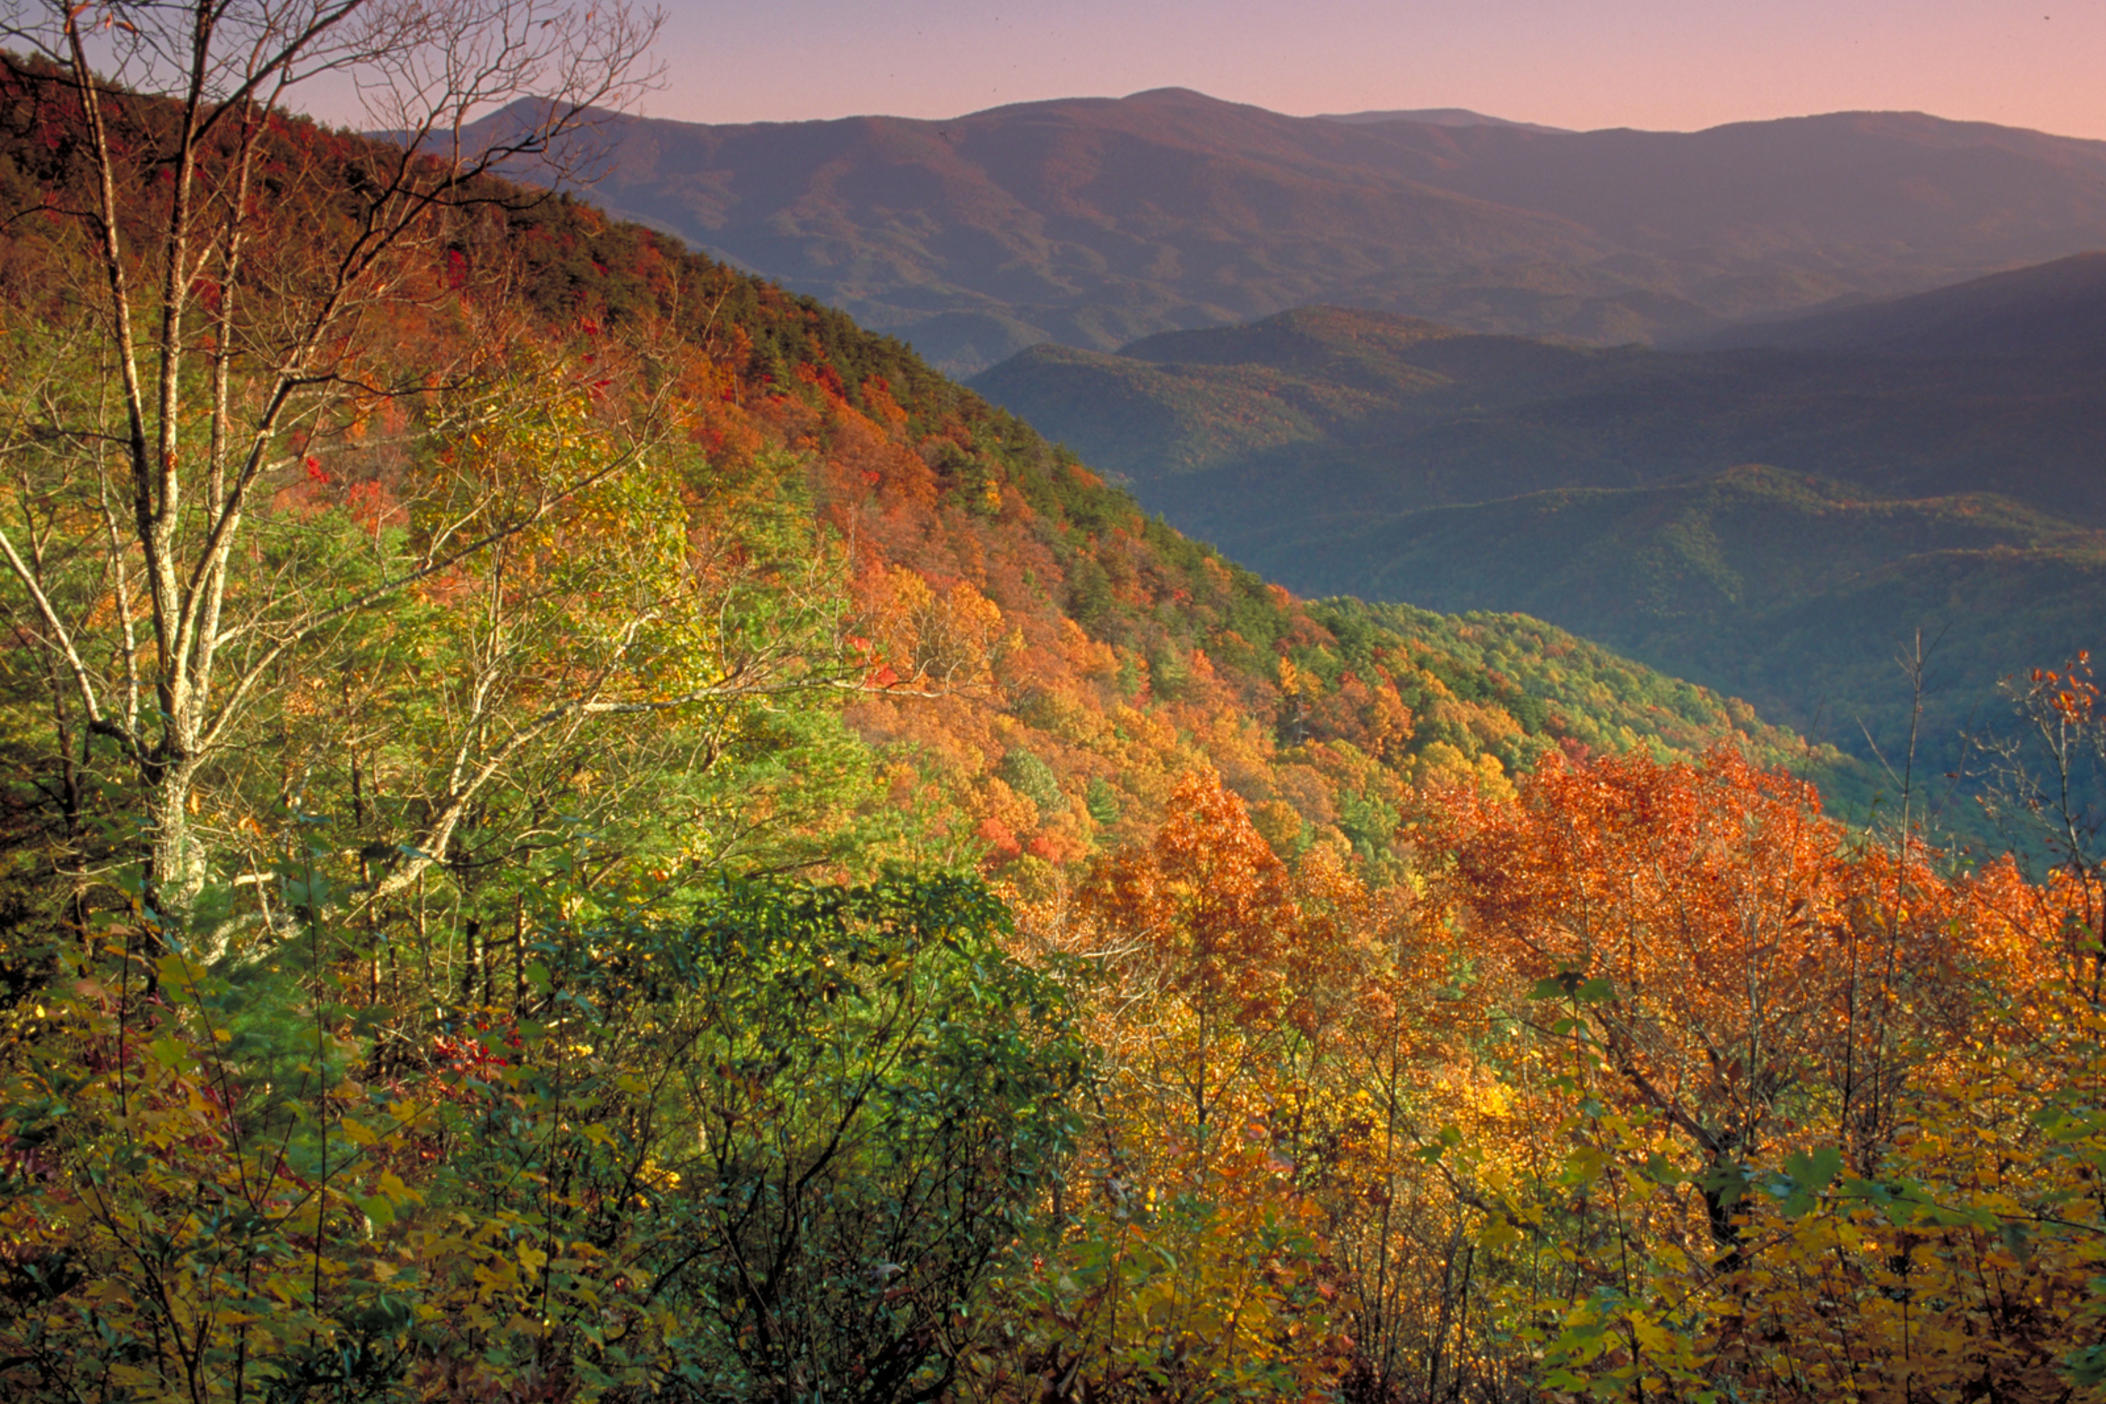 Fort Mountain State Park, located between Dalton and Ellijay in North Georgia, is one of the top ten state parks for viewing fall foliage.